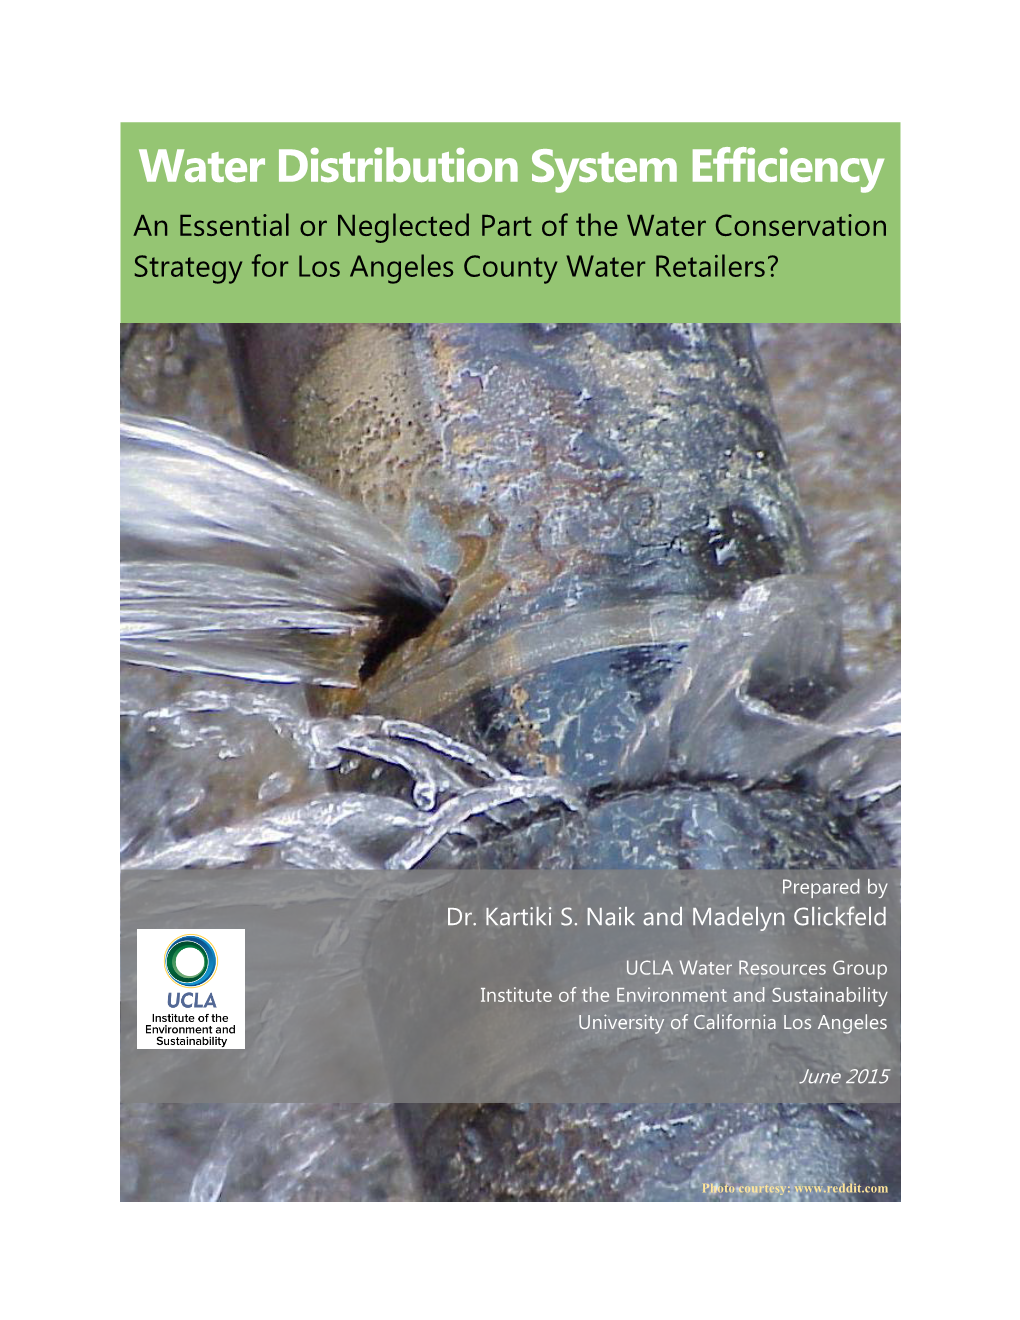 Water Distribution System Efficiency an Essential Or Neglected Part of the Water Conservation Strategy for Los Angeles County Water Retailers?